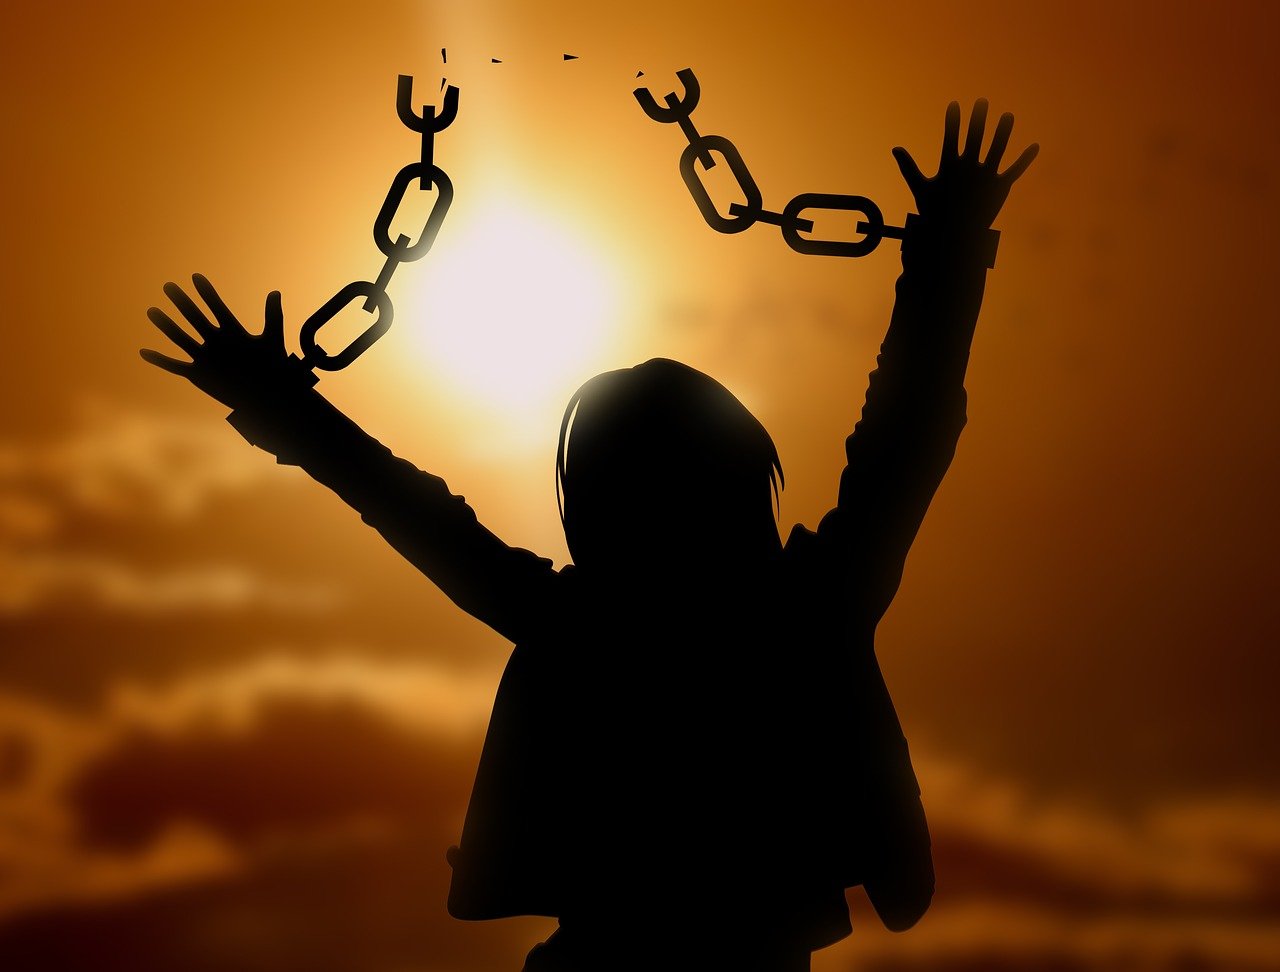 A person breaking free of their chains.